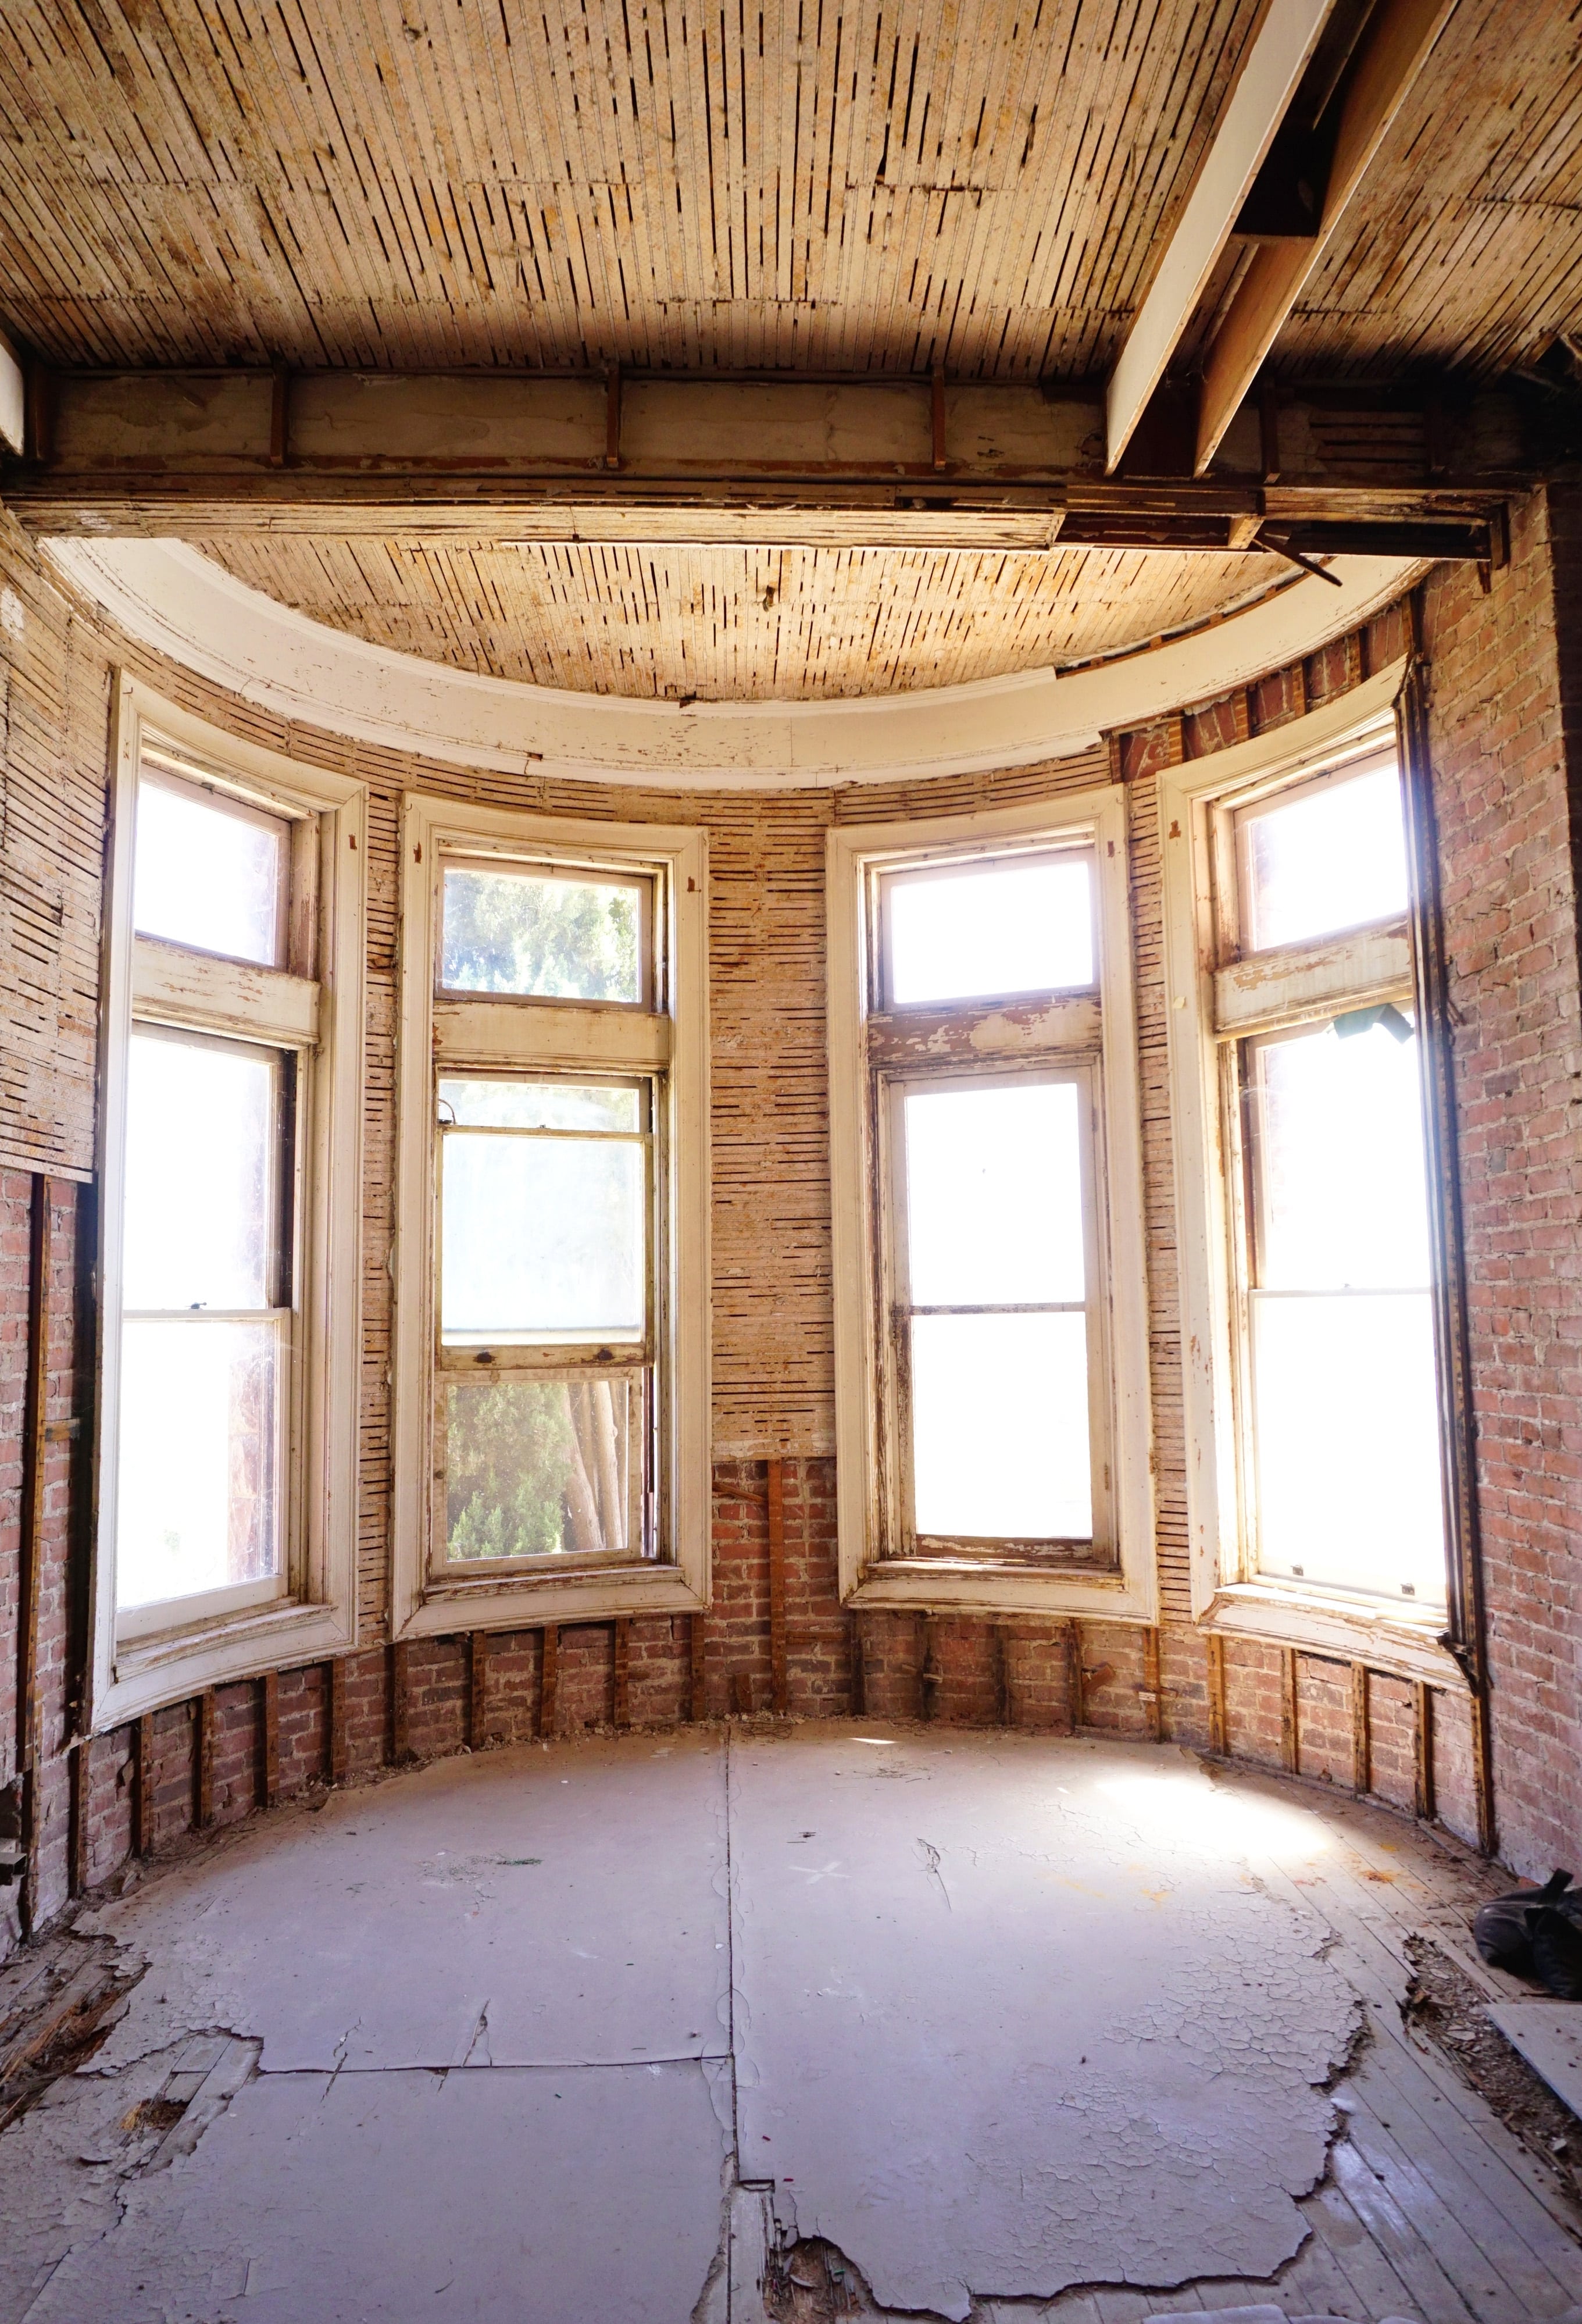 interior of curved portico in state of disrepair with exposed brick and lath